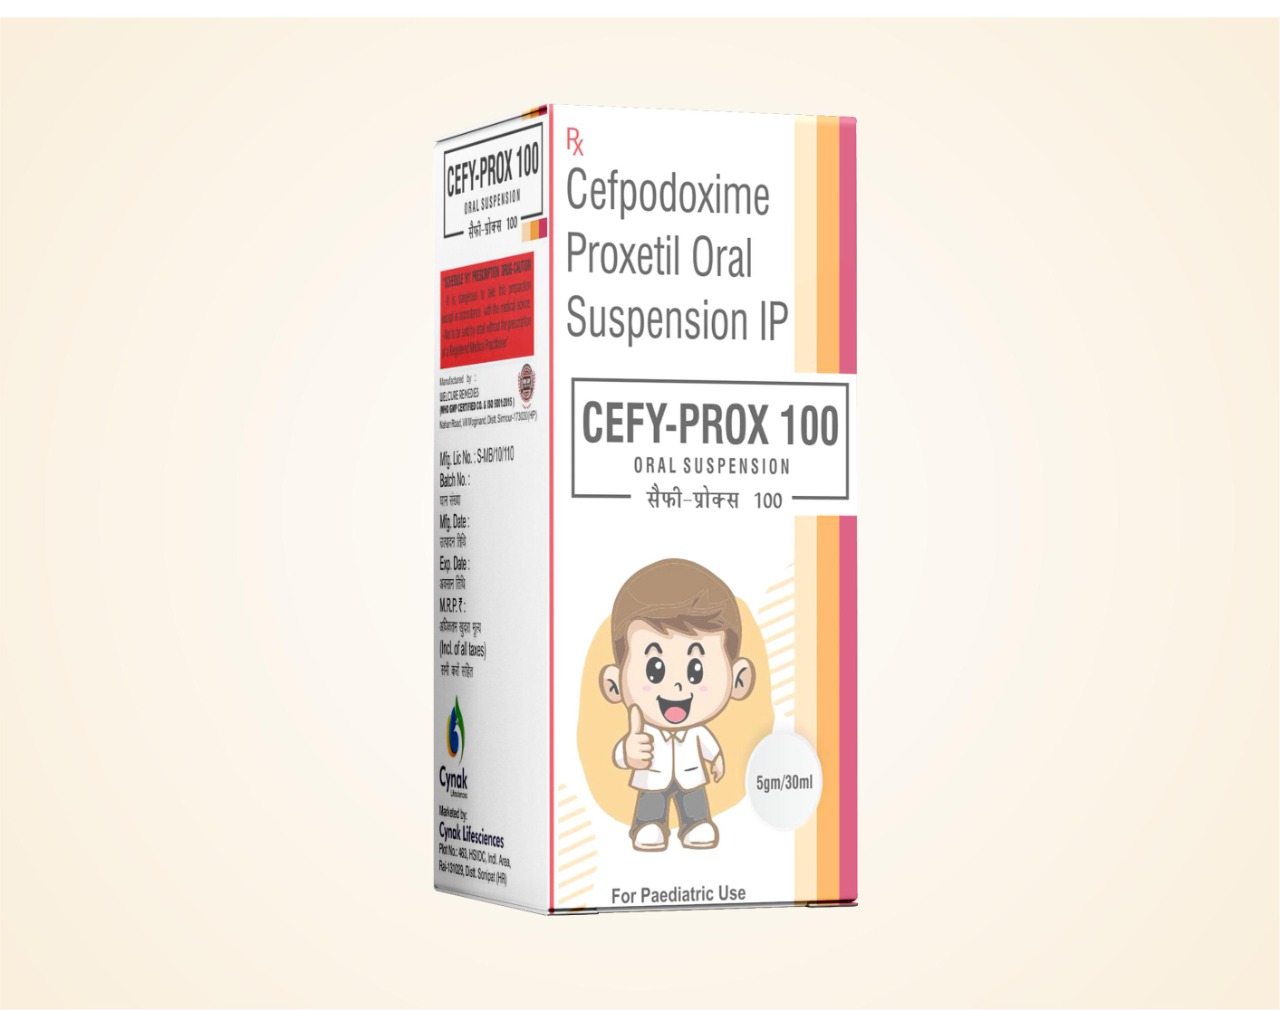 Product Name: CEFY PROX 100, Compositions of CEFY PROX 100 are cefpodoxime proxetil oral suspension ip - Cynak Healthcare